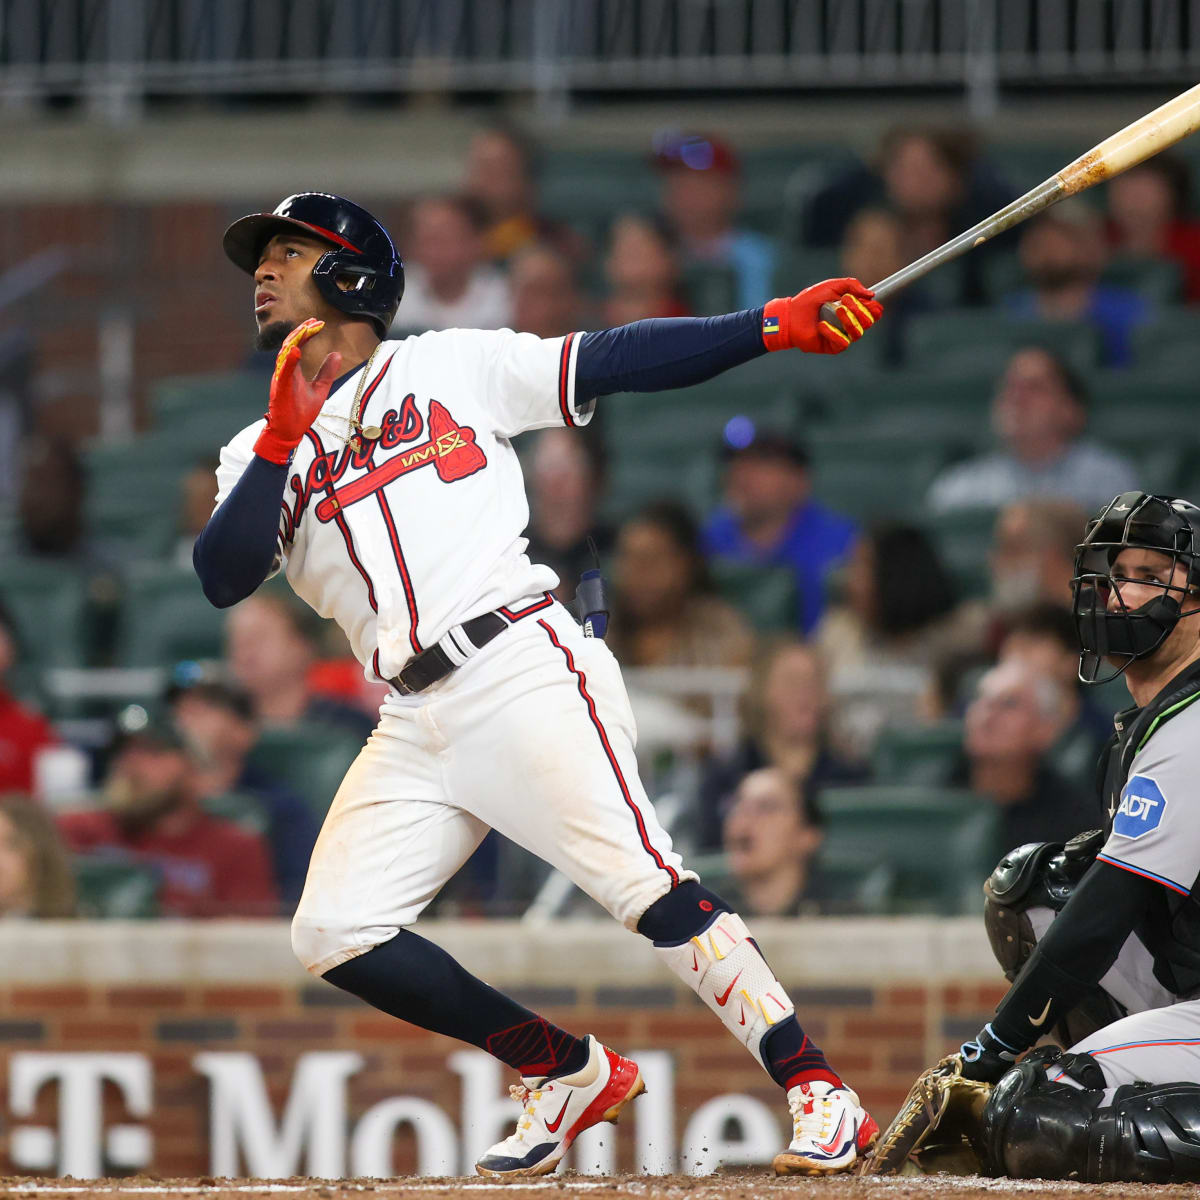 WATCH: Ozzie Albies takes Sandy Alcantara deep to give Braves